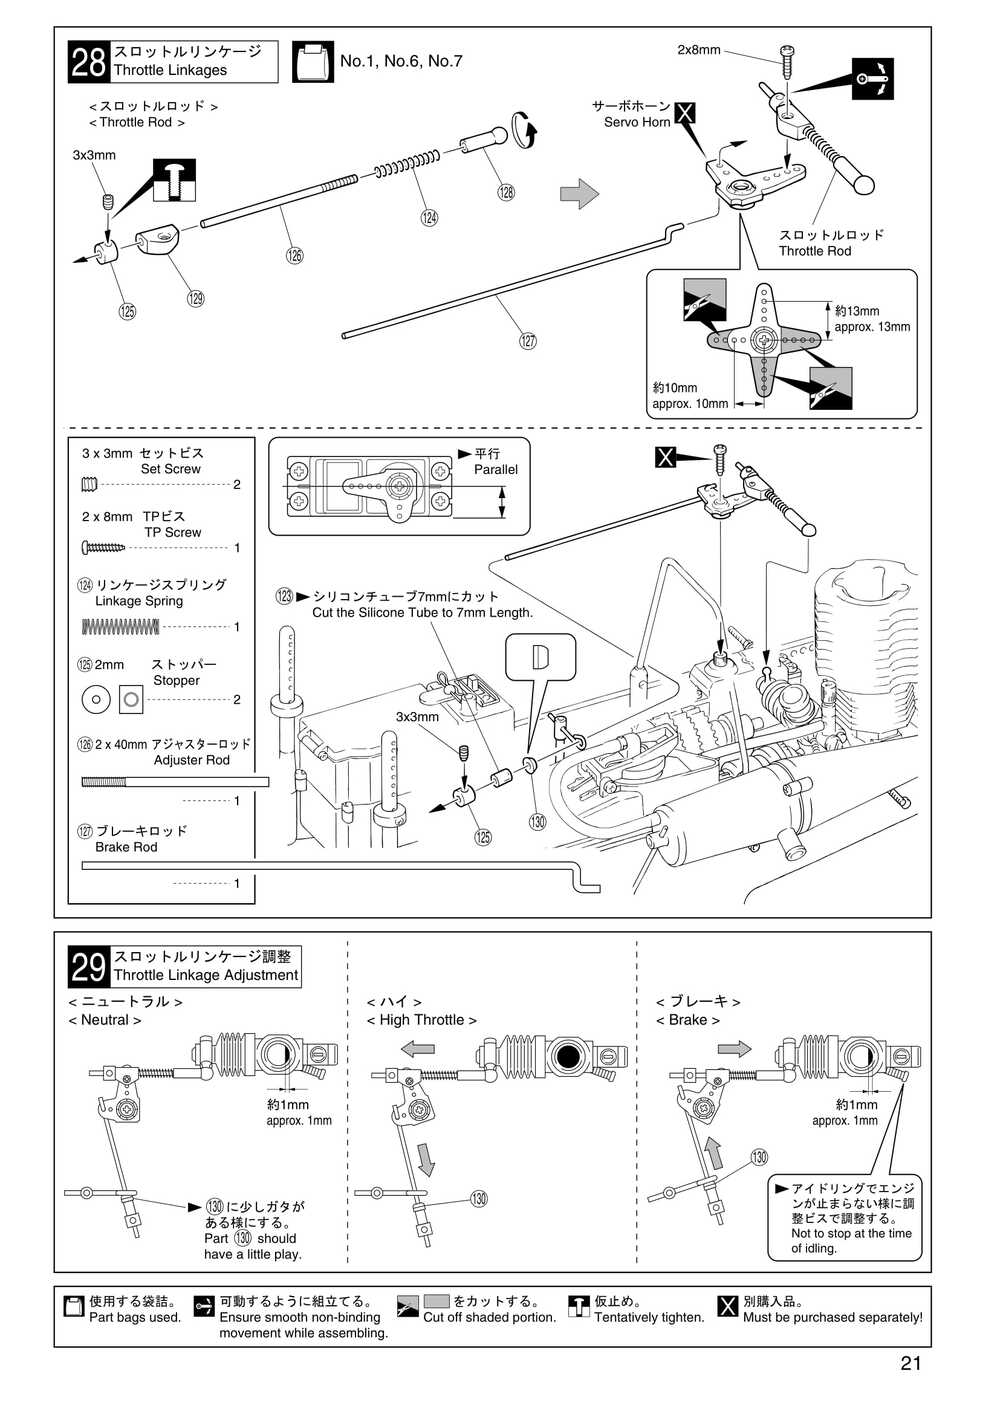 Kyosho - 31221 - Mad-Force - Manual - Page 21